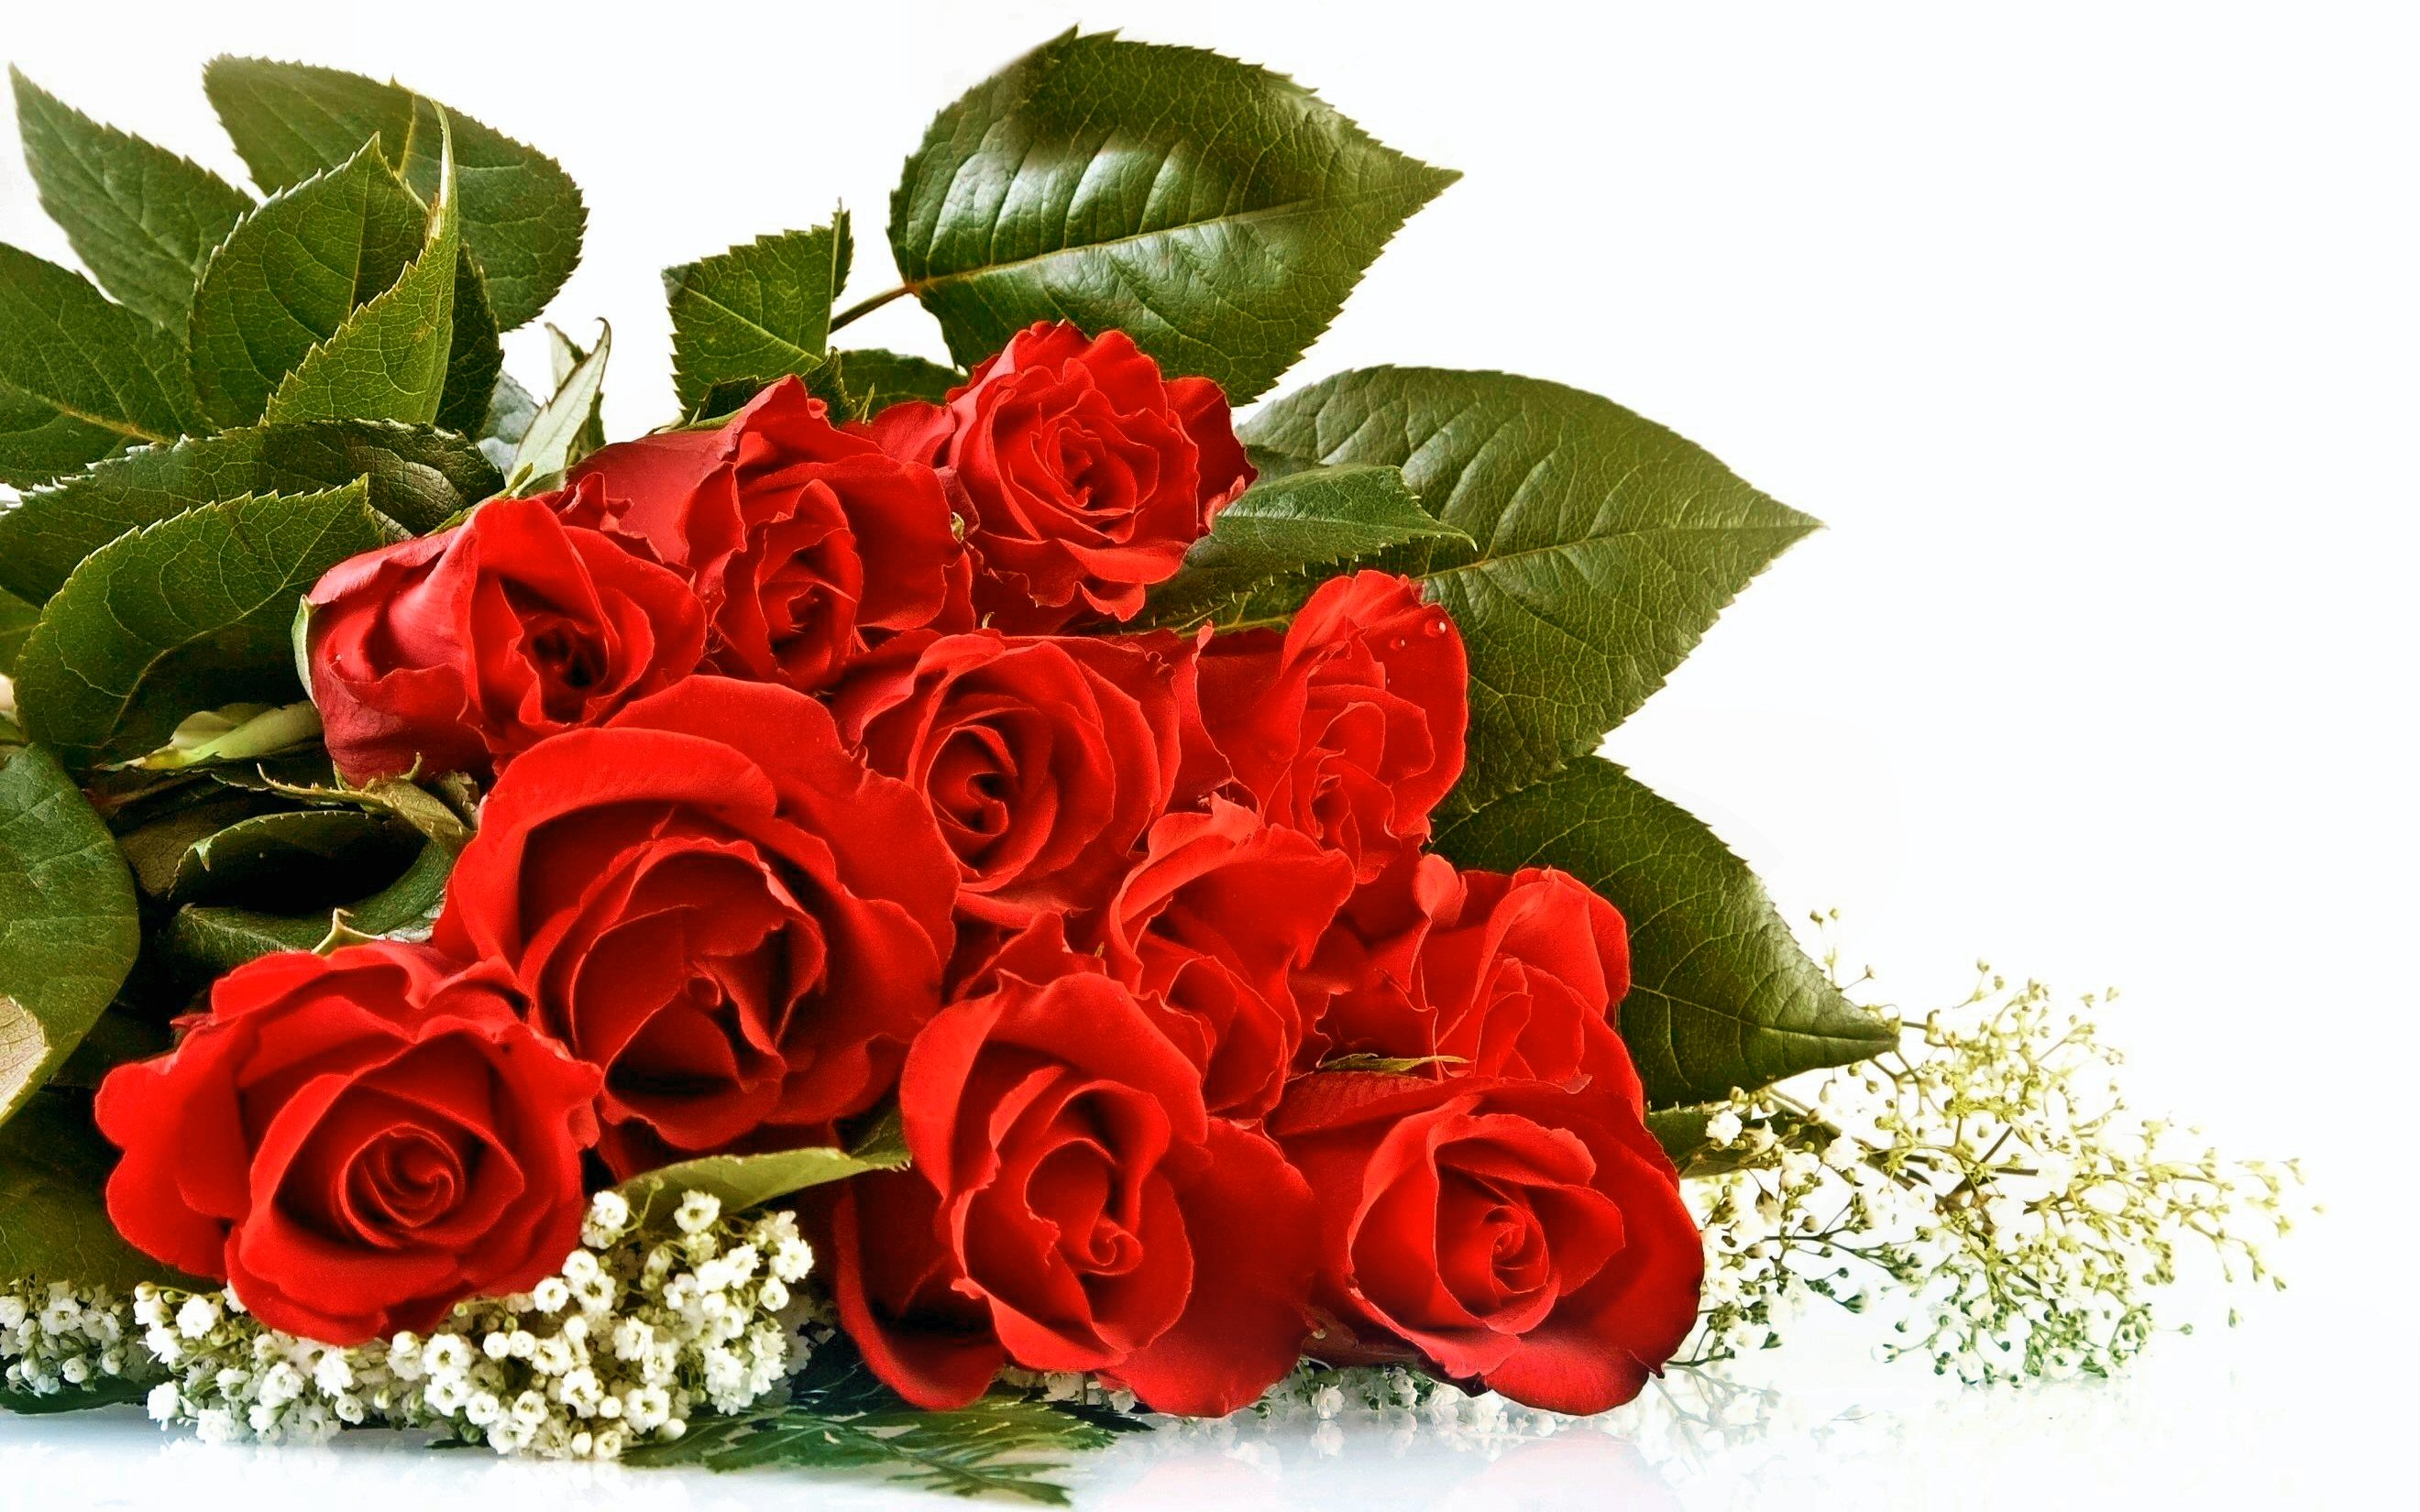 flower, red flower, flowers, bouquet, red rose, valentine's day, earth, rose, leaf